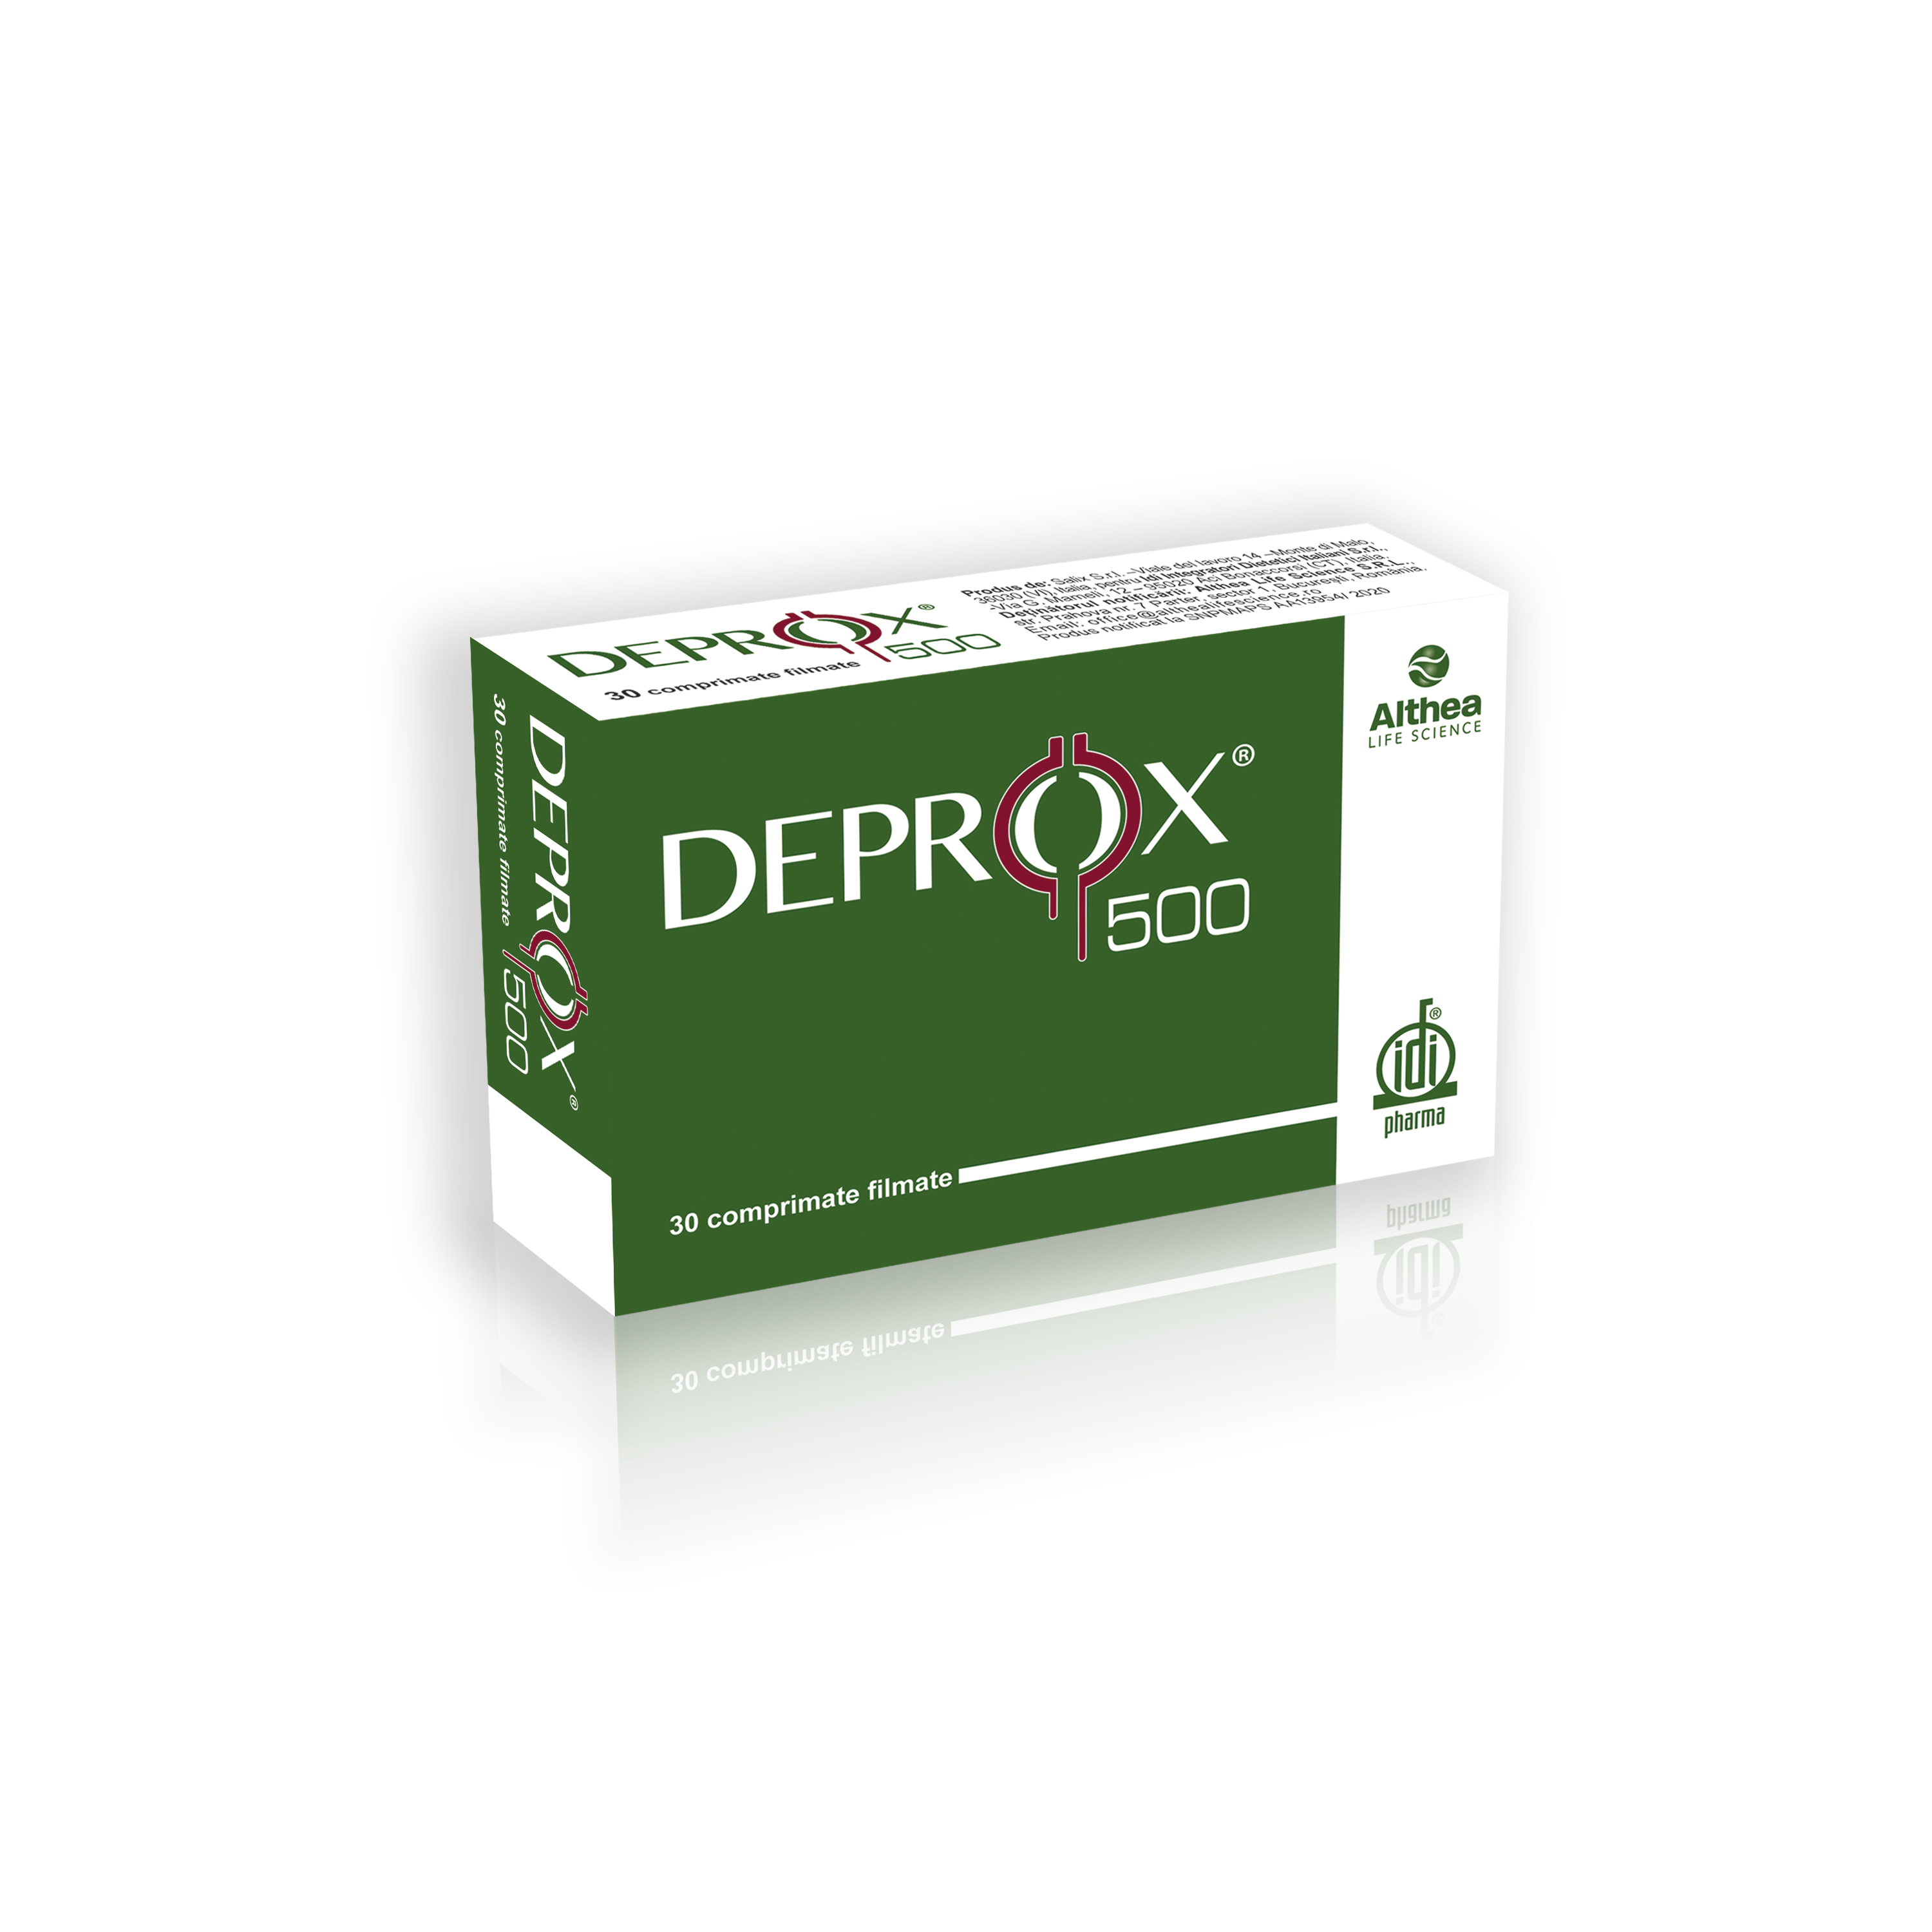 Prostata - Deprox, 500mg, 30 comprimate, Althea Life Science, sinapis.ro